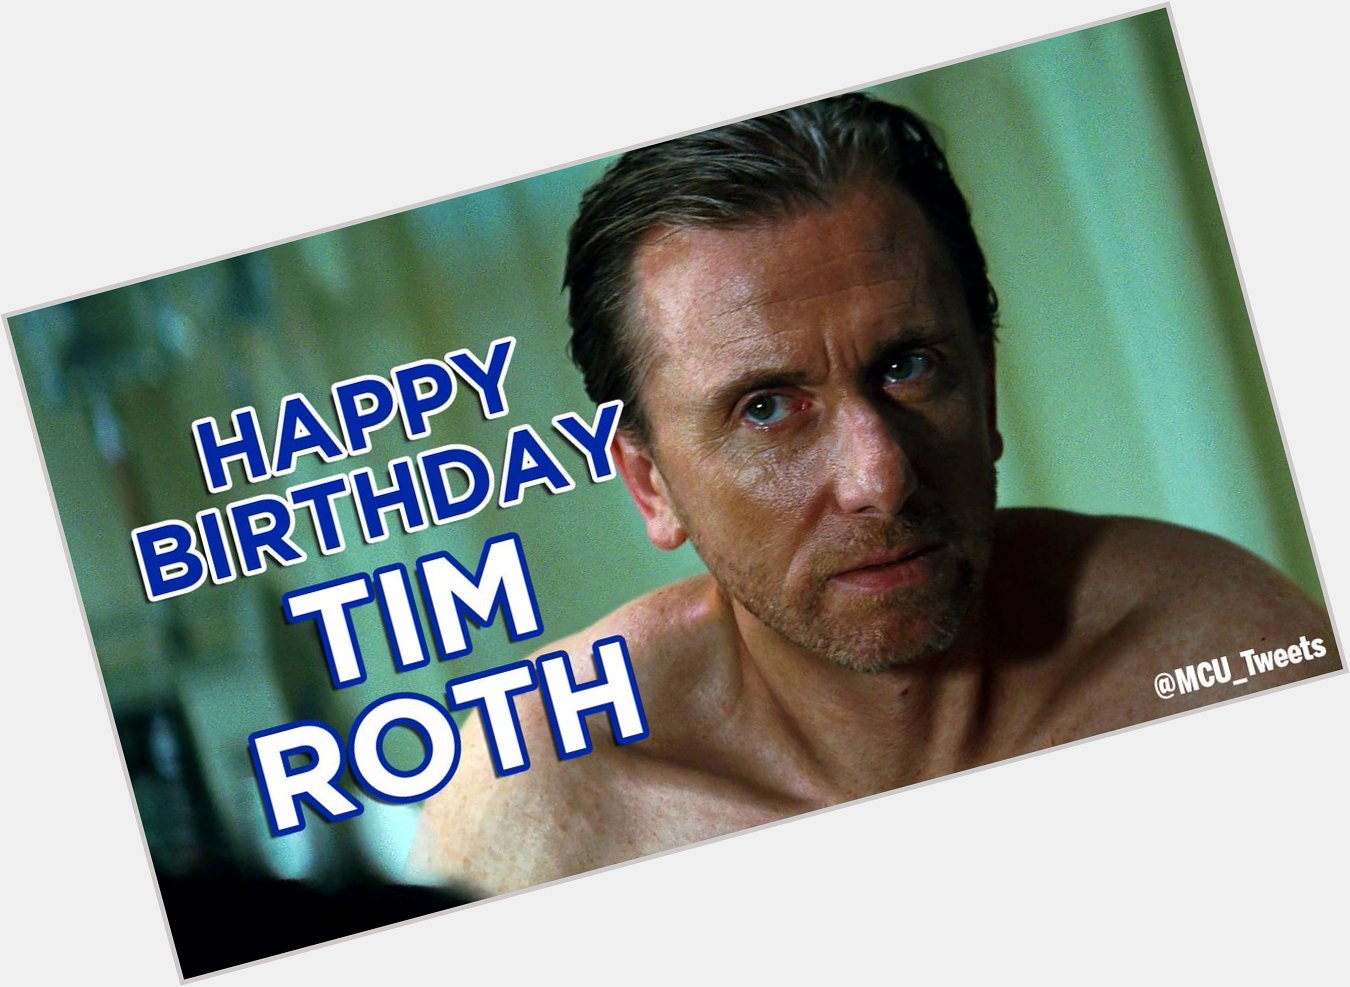 Wishing Tim Roth, who played Emil Blonsky / Abomination in THE INCREDIBLE HULK, a very happy 56th birthday! 